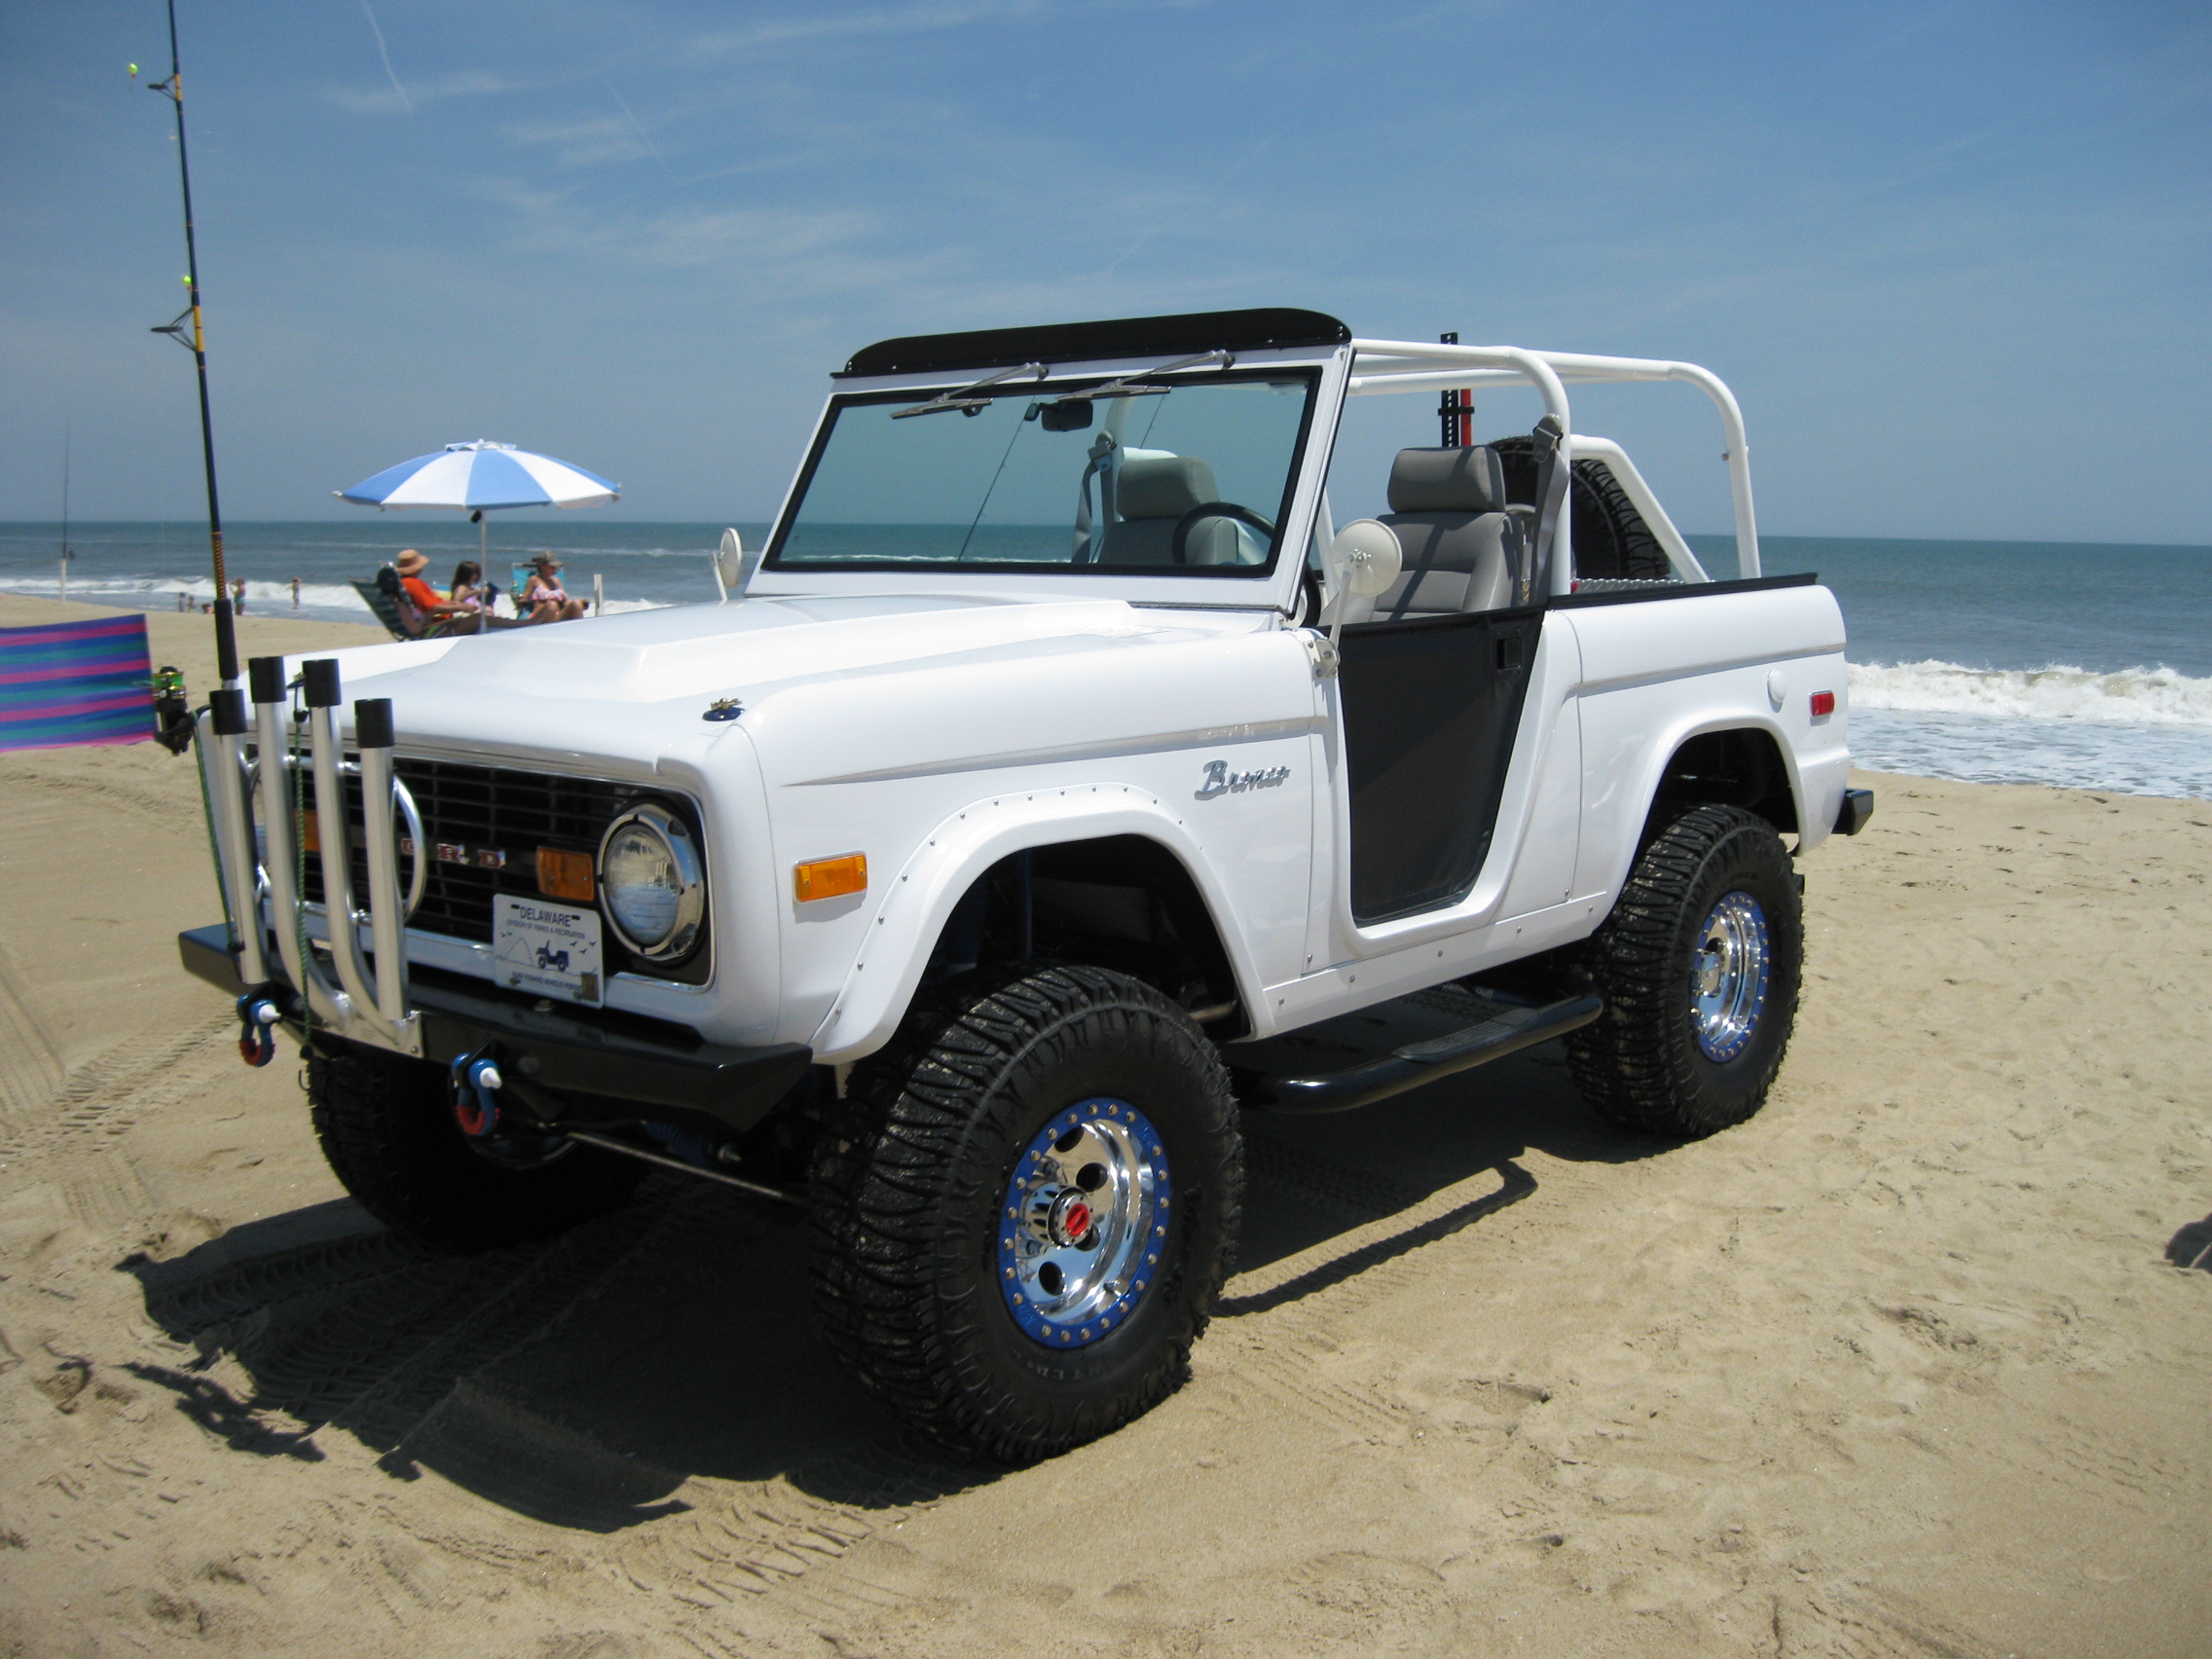 Ford Bronco Beach Builds / Surf Fishing Builds ready for the summer? Post yours! 2014-05-27 00.49.25